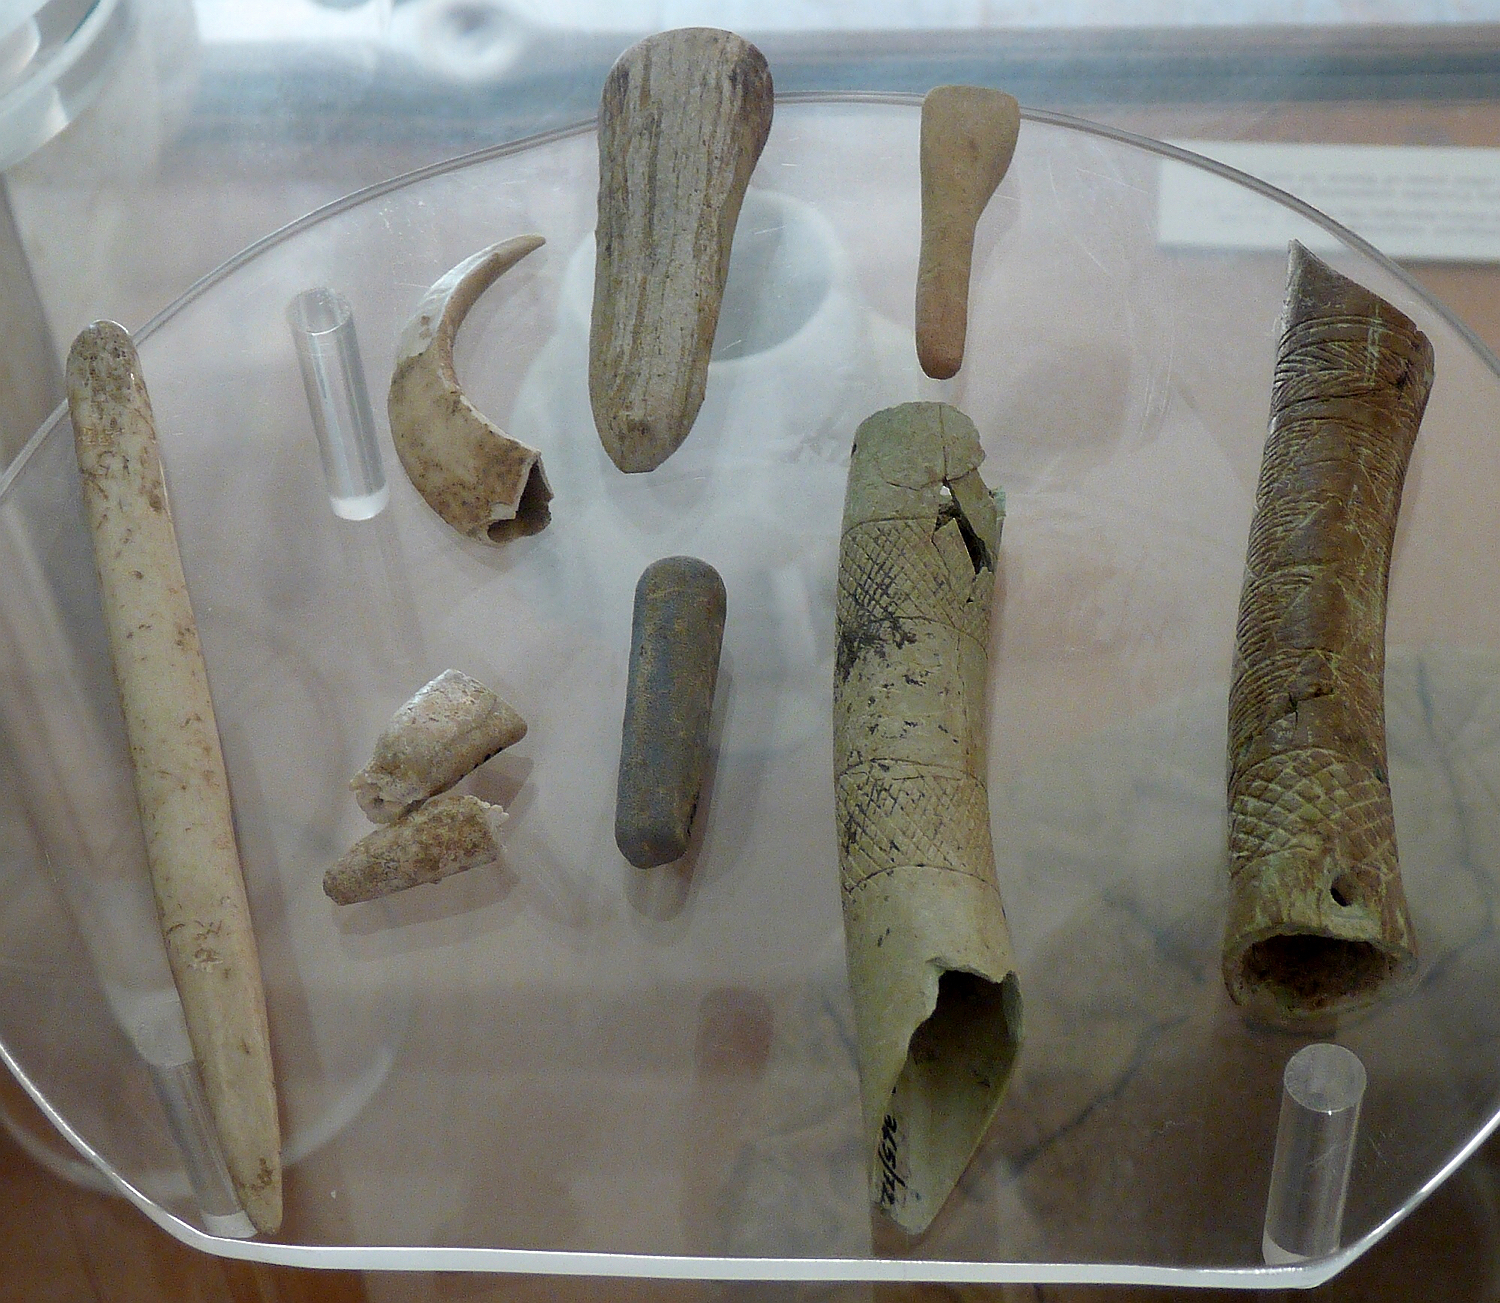 cycladic bone containers and tools